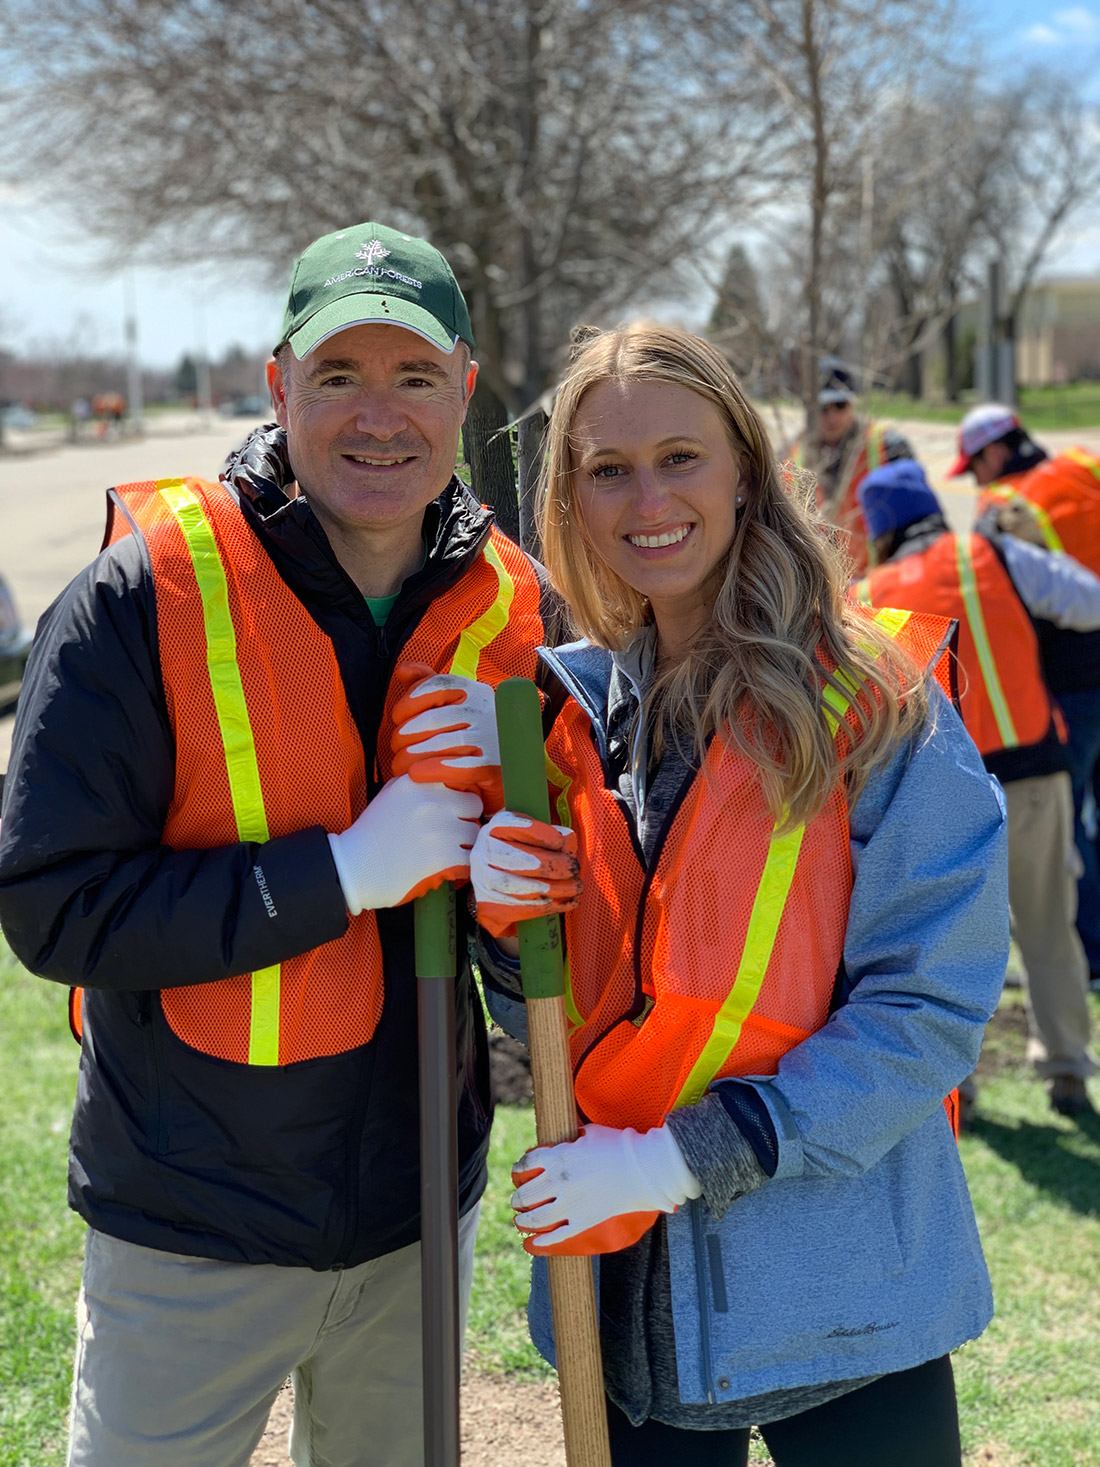 Jad Daley, president and CEO of American Forests, and Daniela Lukomski, marketing manager at Eddie Bauer, pose next to a newly planted tree in Skokie, Ill.